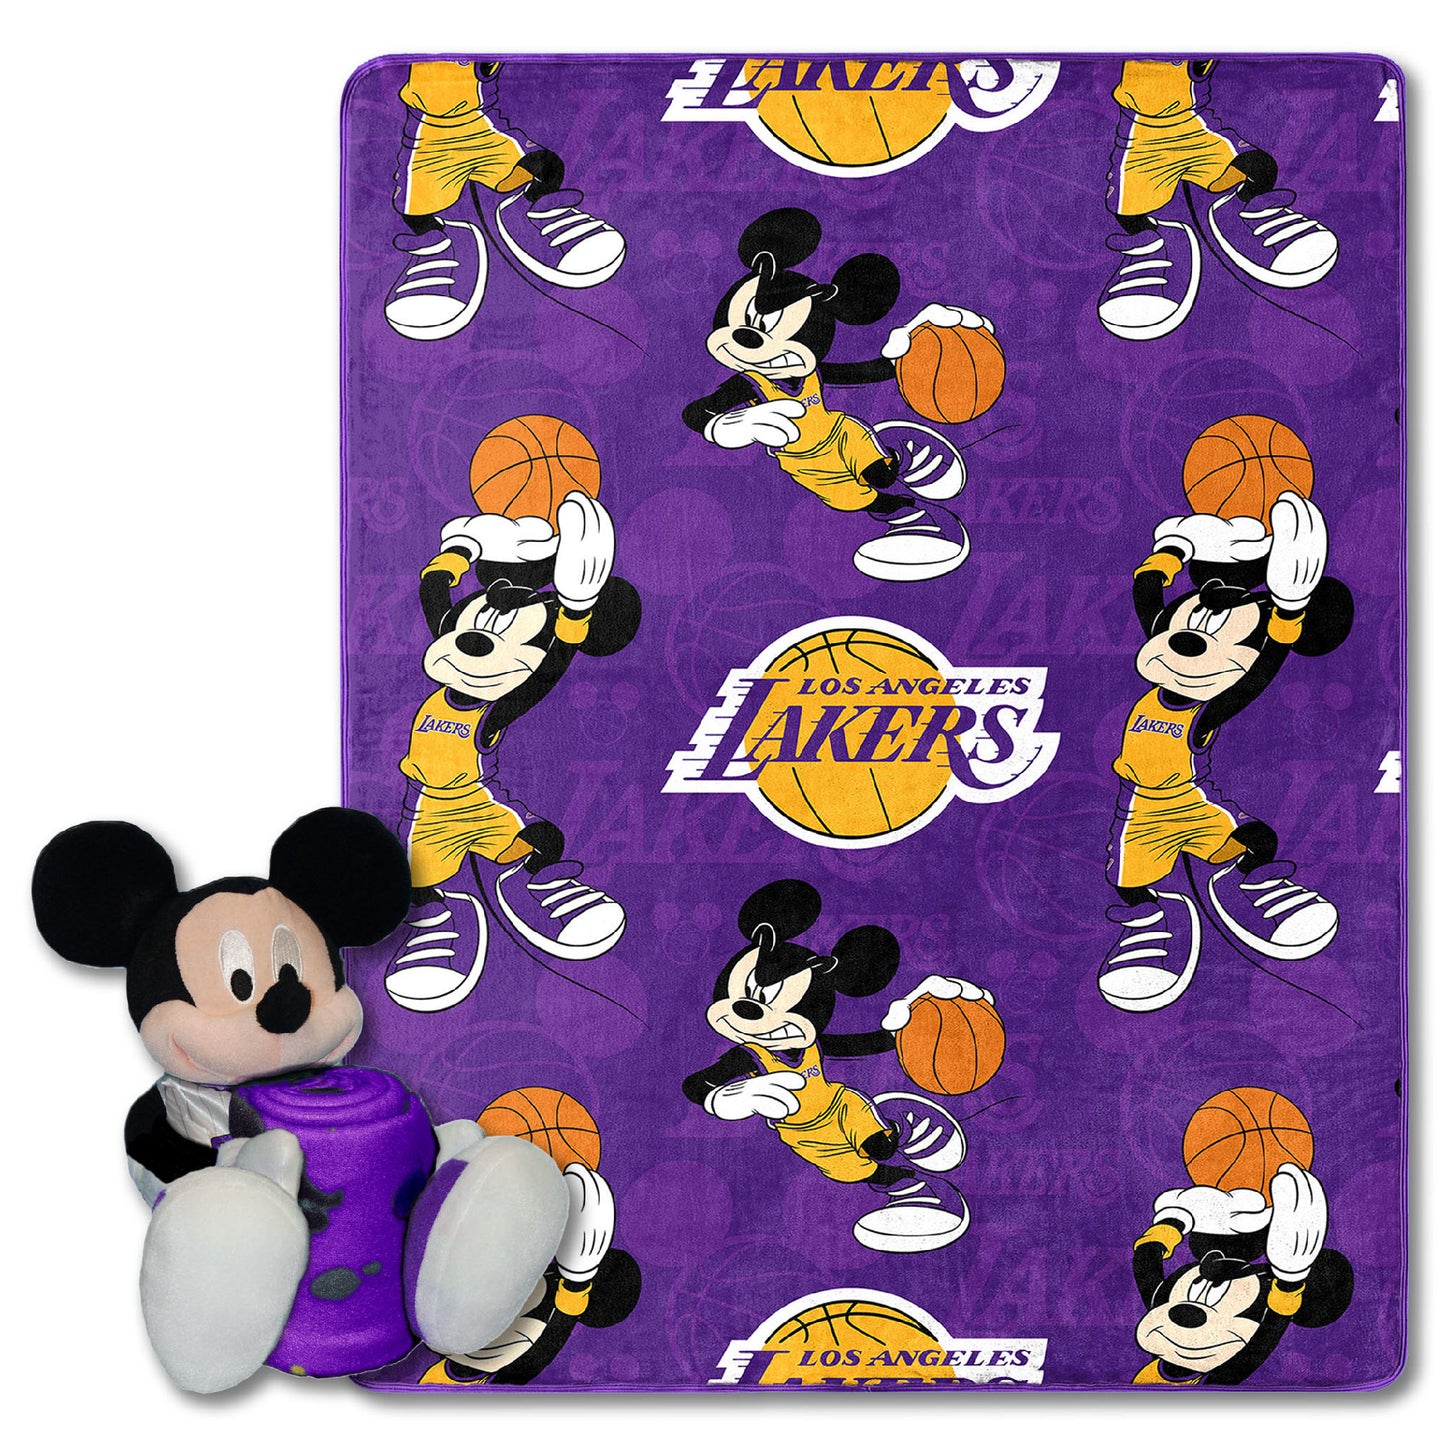 Lakers OFFICIAL NBA & Disney's Mickey Mouse Character Hugger Pillow & Silk Touch Throw Set;  40" x 50"